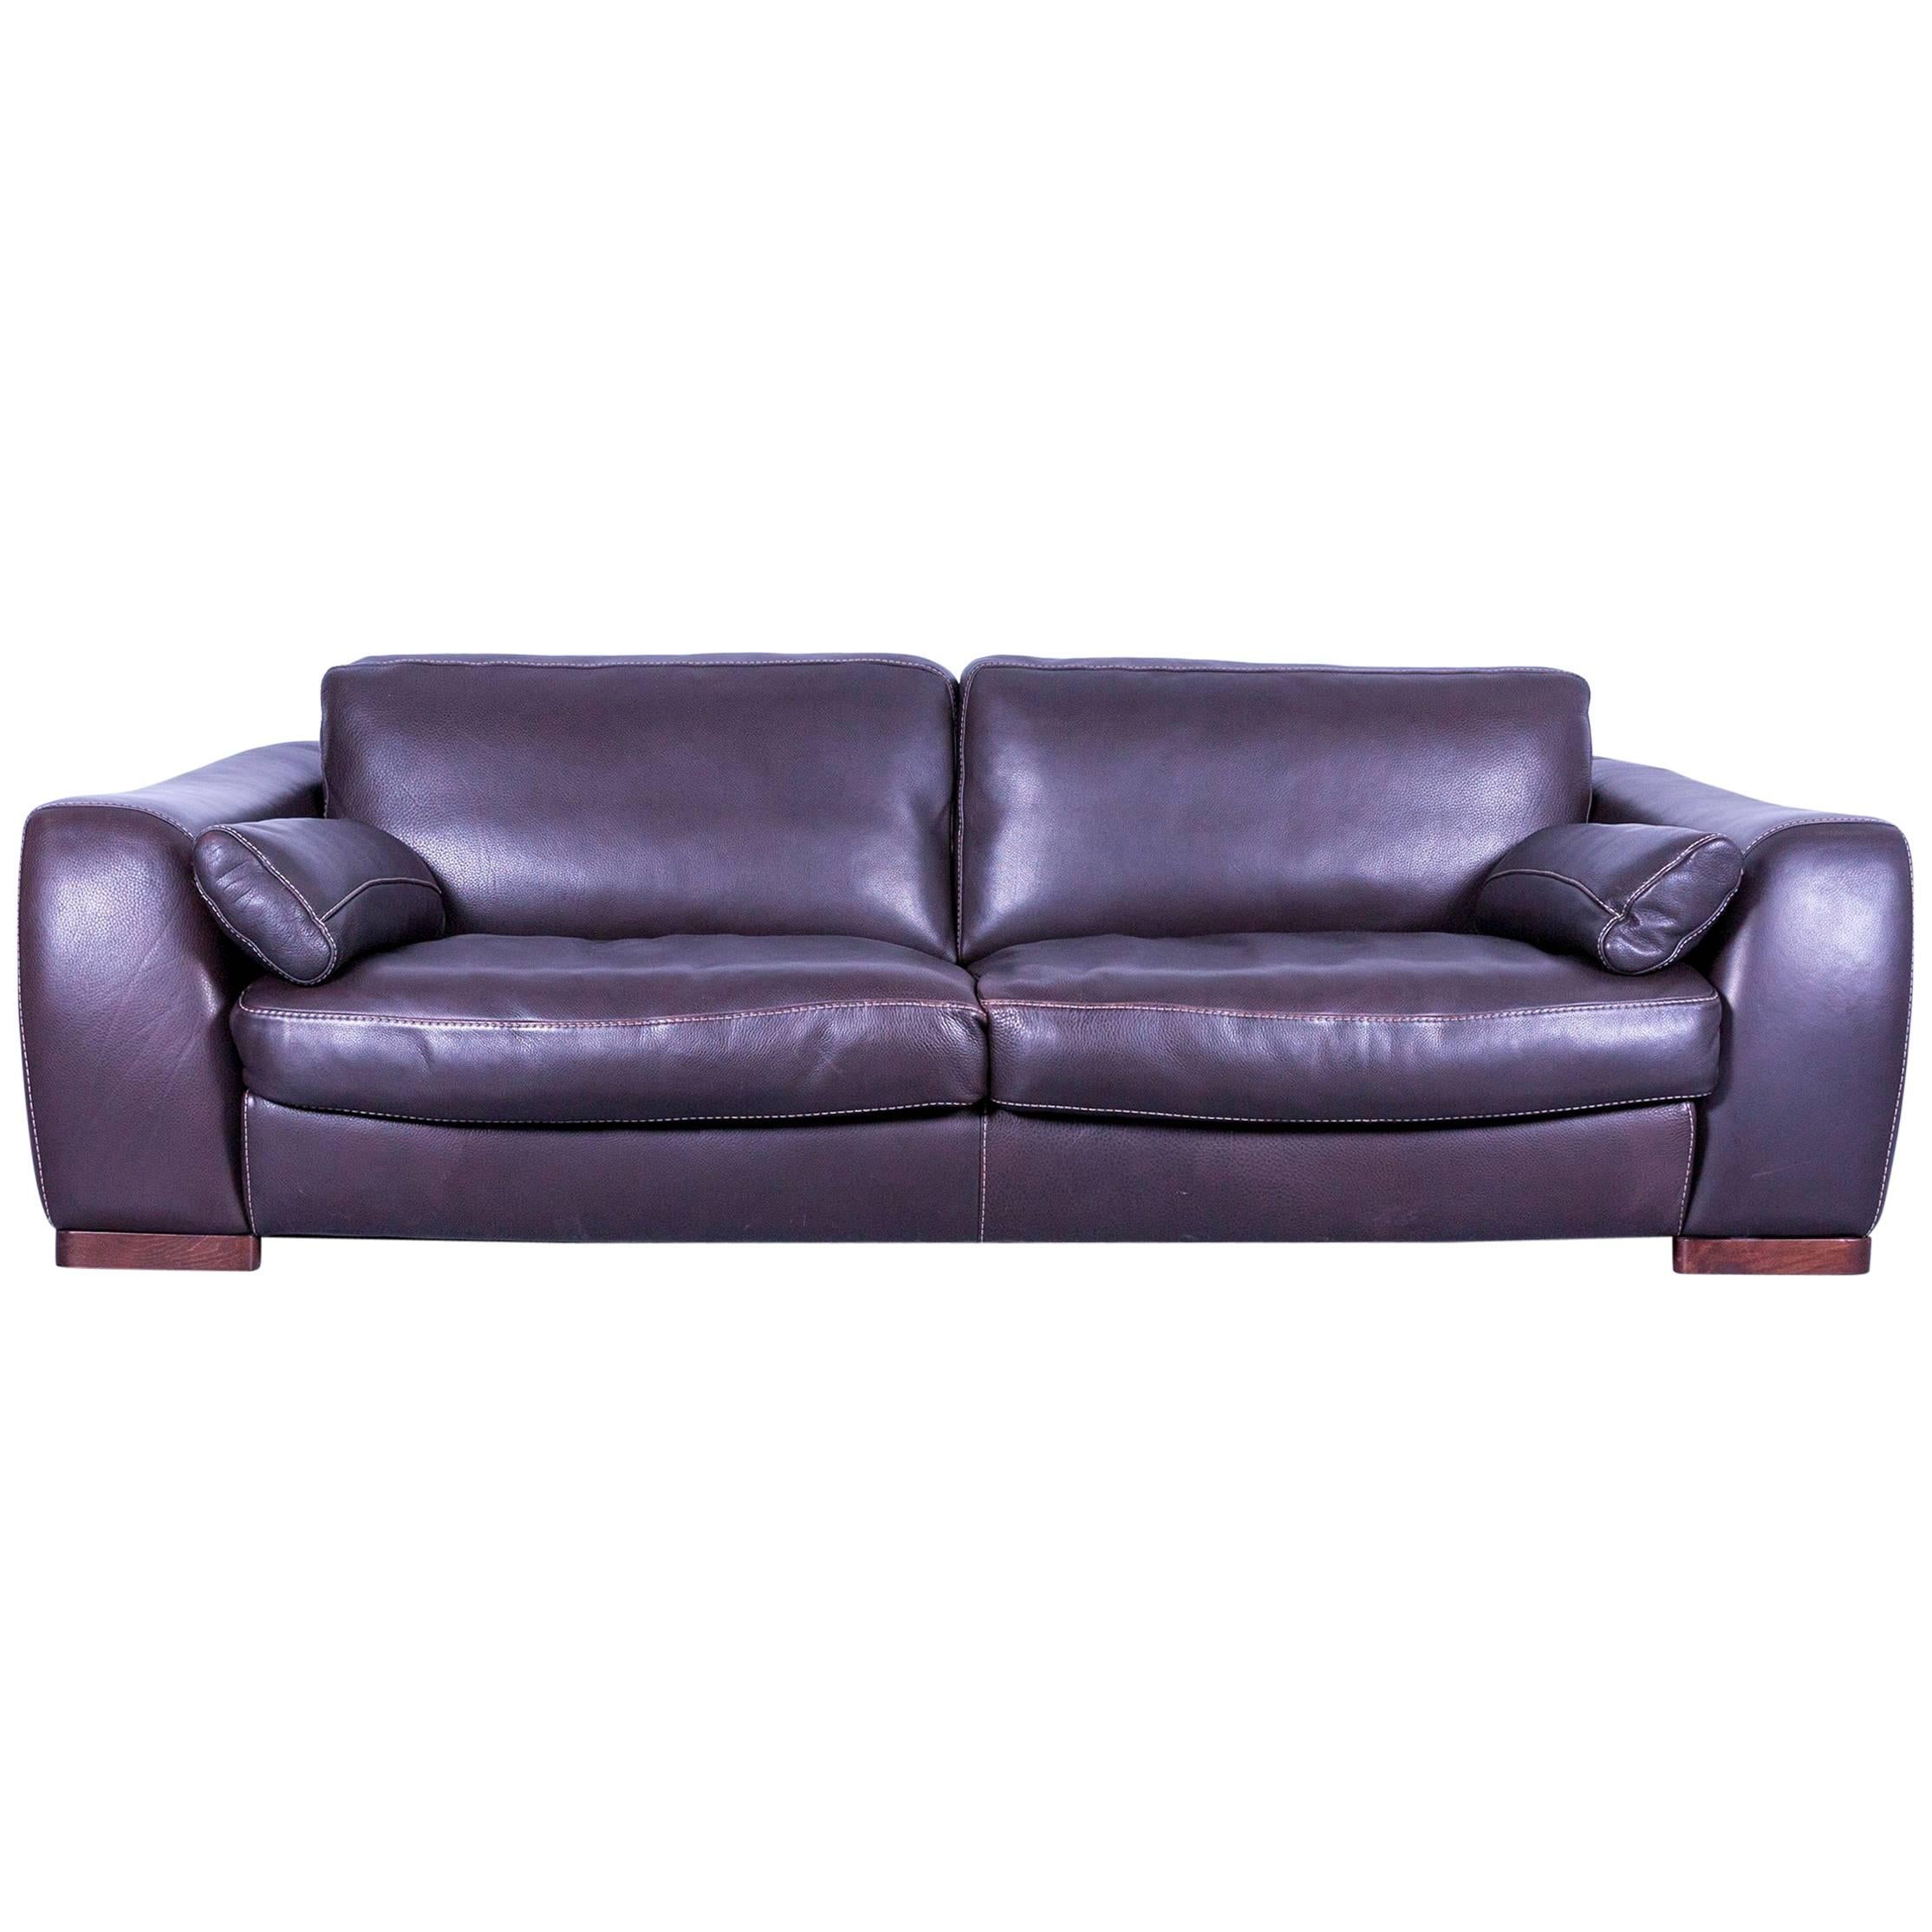 Incanto Designer Sofa brown Three Seater Couch with Pillows Leather